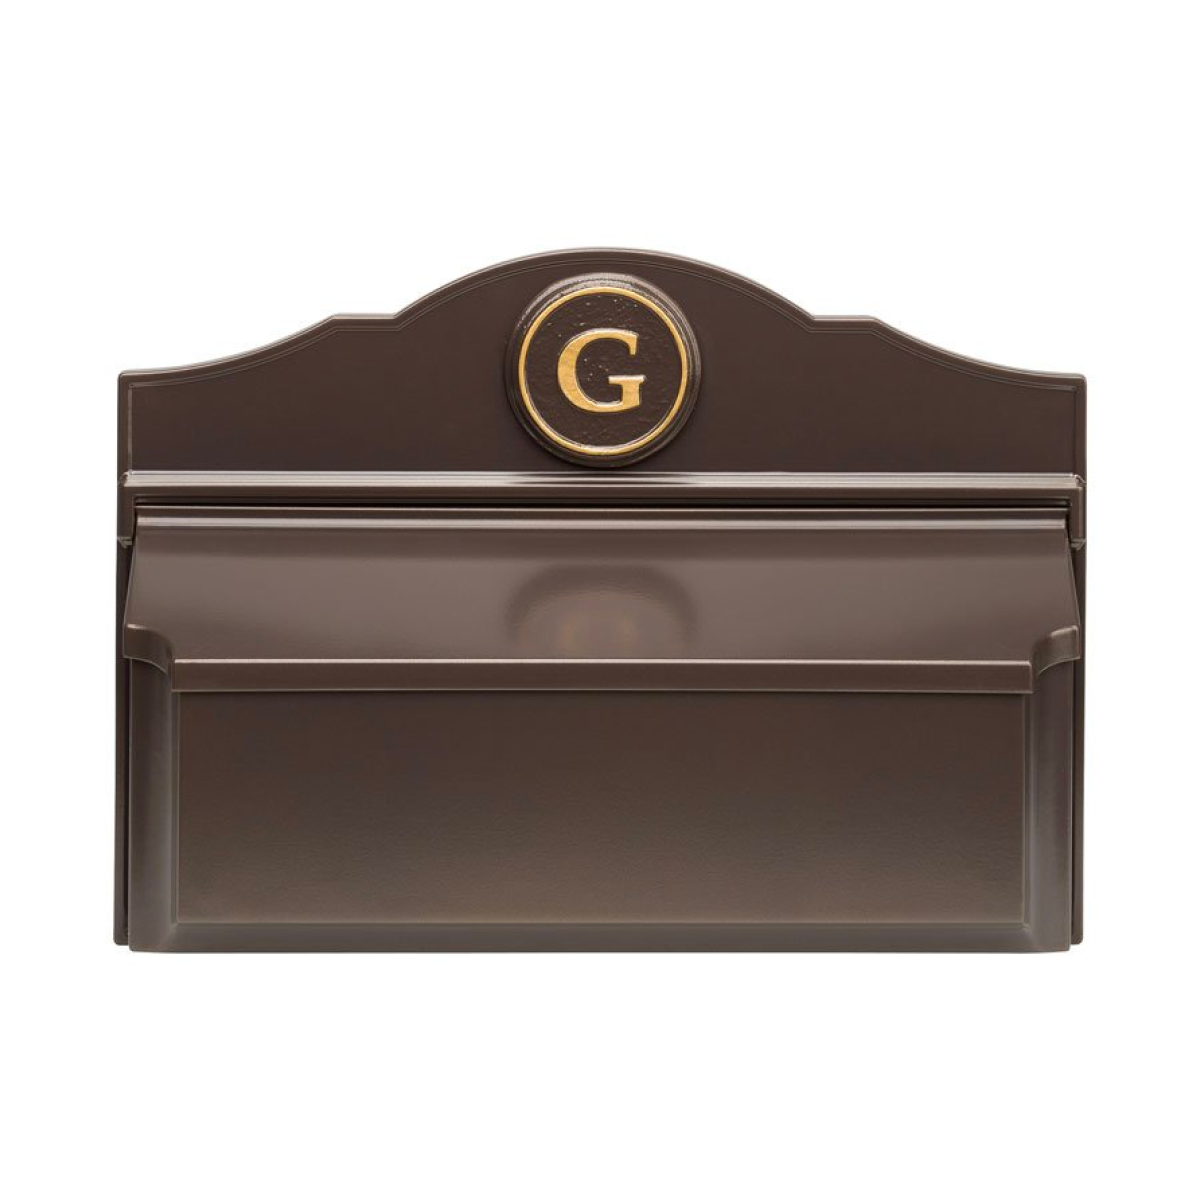 Whitehall Colonial Wall Mount Mailbox Package 3 (Mailbox & Monogram) Product Image